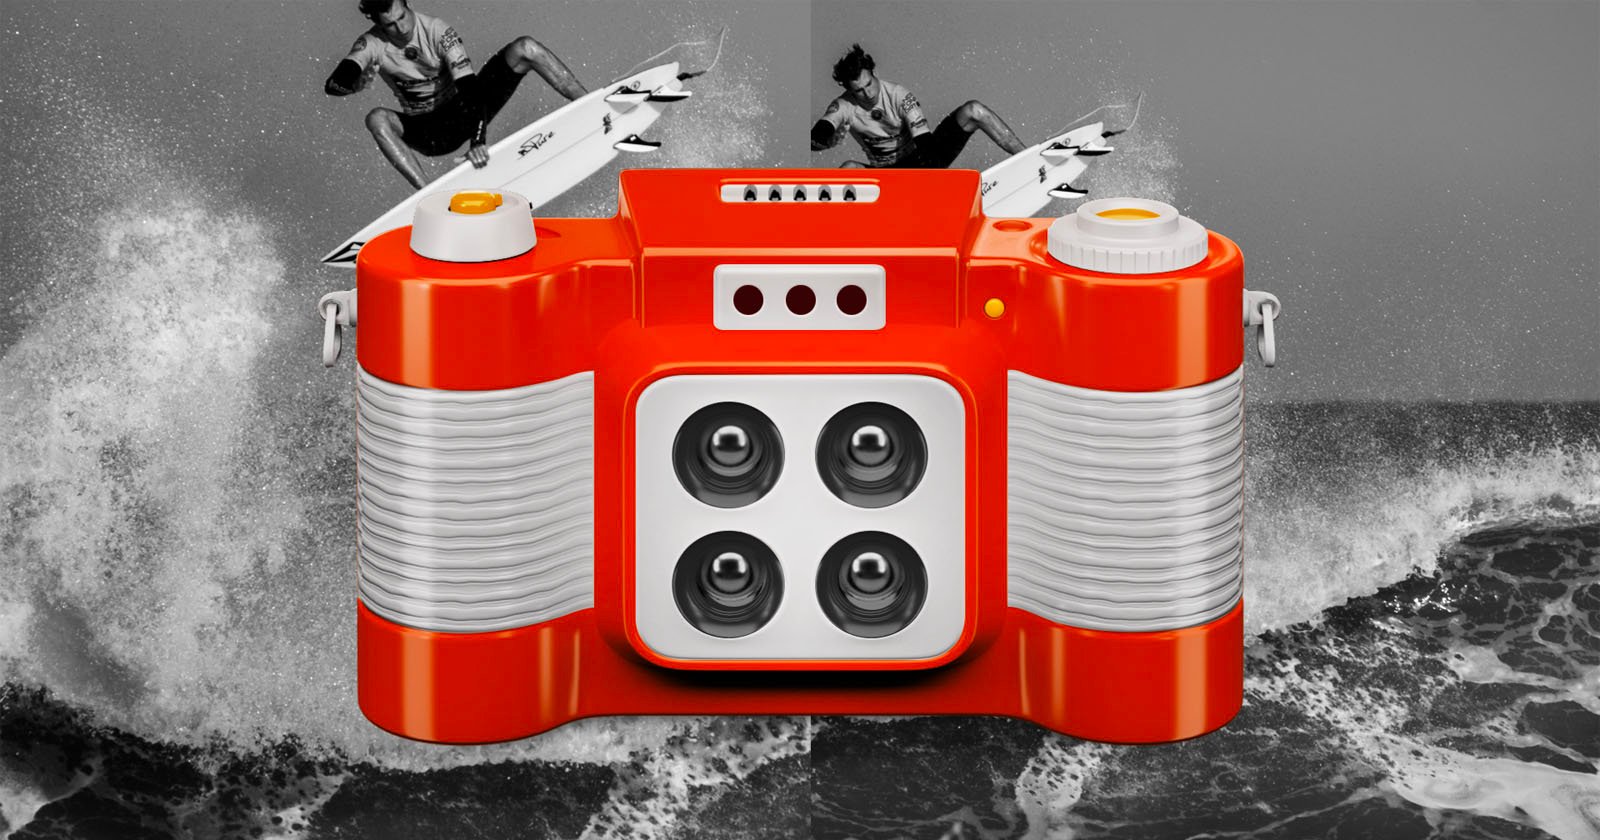 A stylized image of a bright orange, toy-like submarine with oversized features in front of a black-and-white photo of two surfers riding waves.